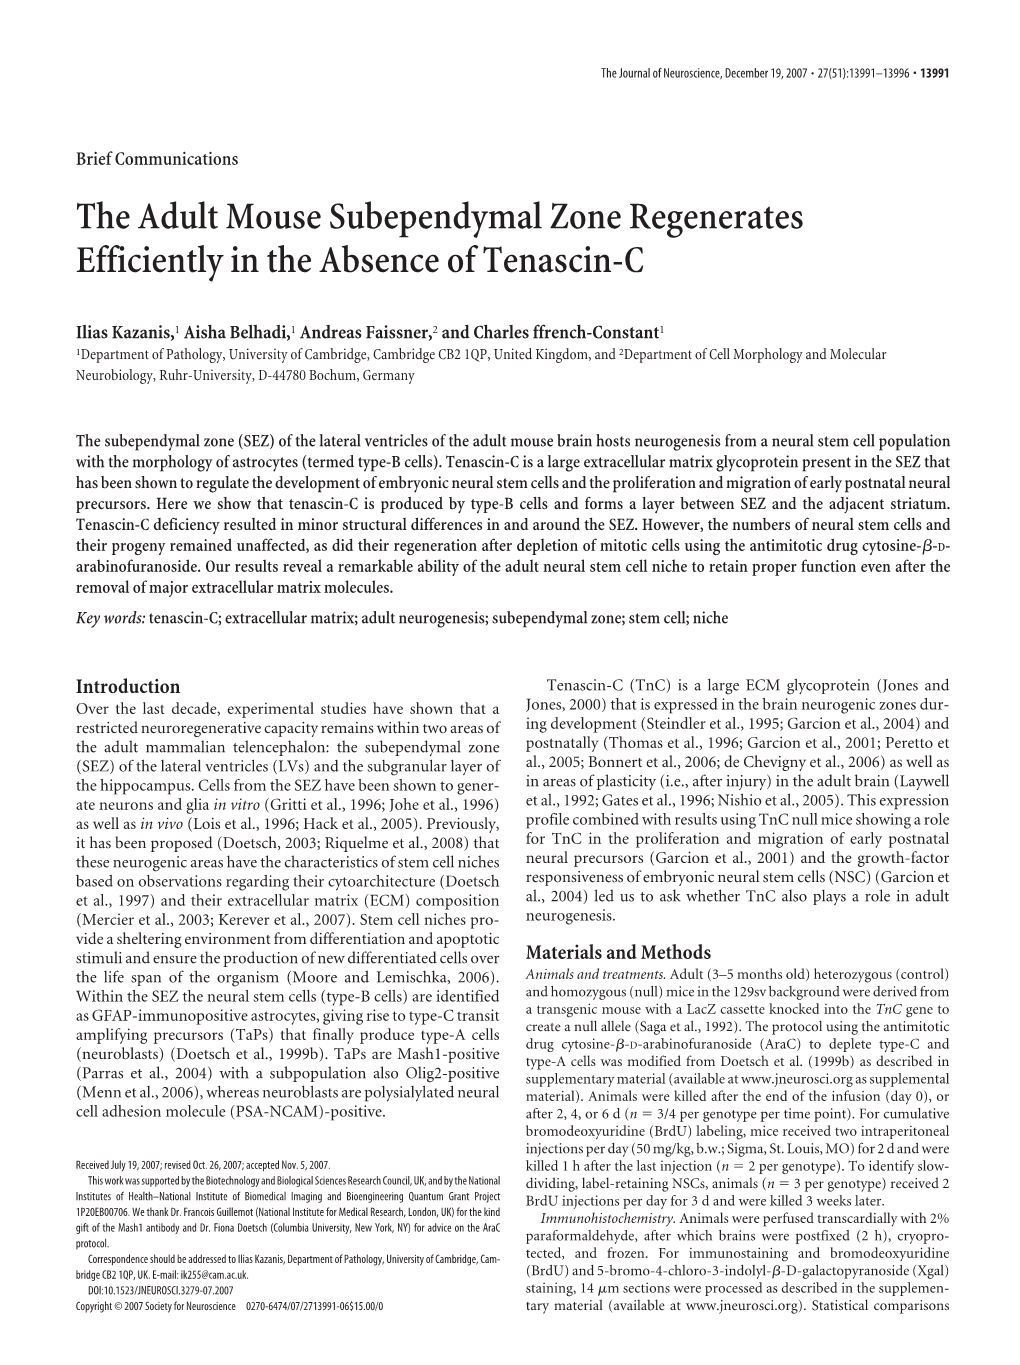 The Adult Mouse Subependymal Zone Regenerates Efficiently in the Absence of Tenascin-C